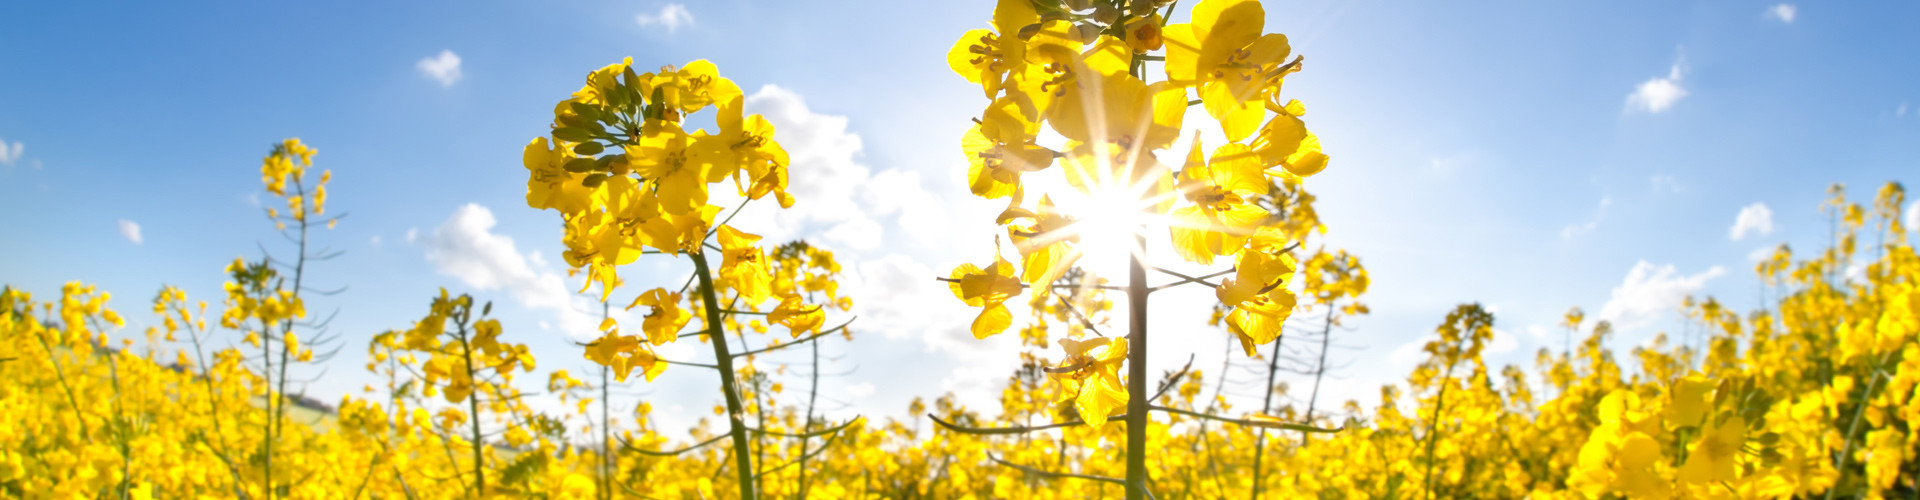 Sunny field of rapeseed